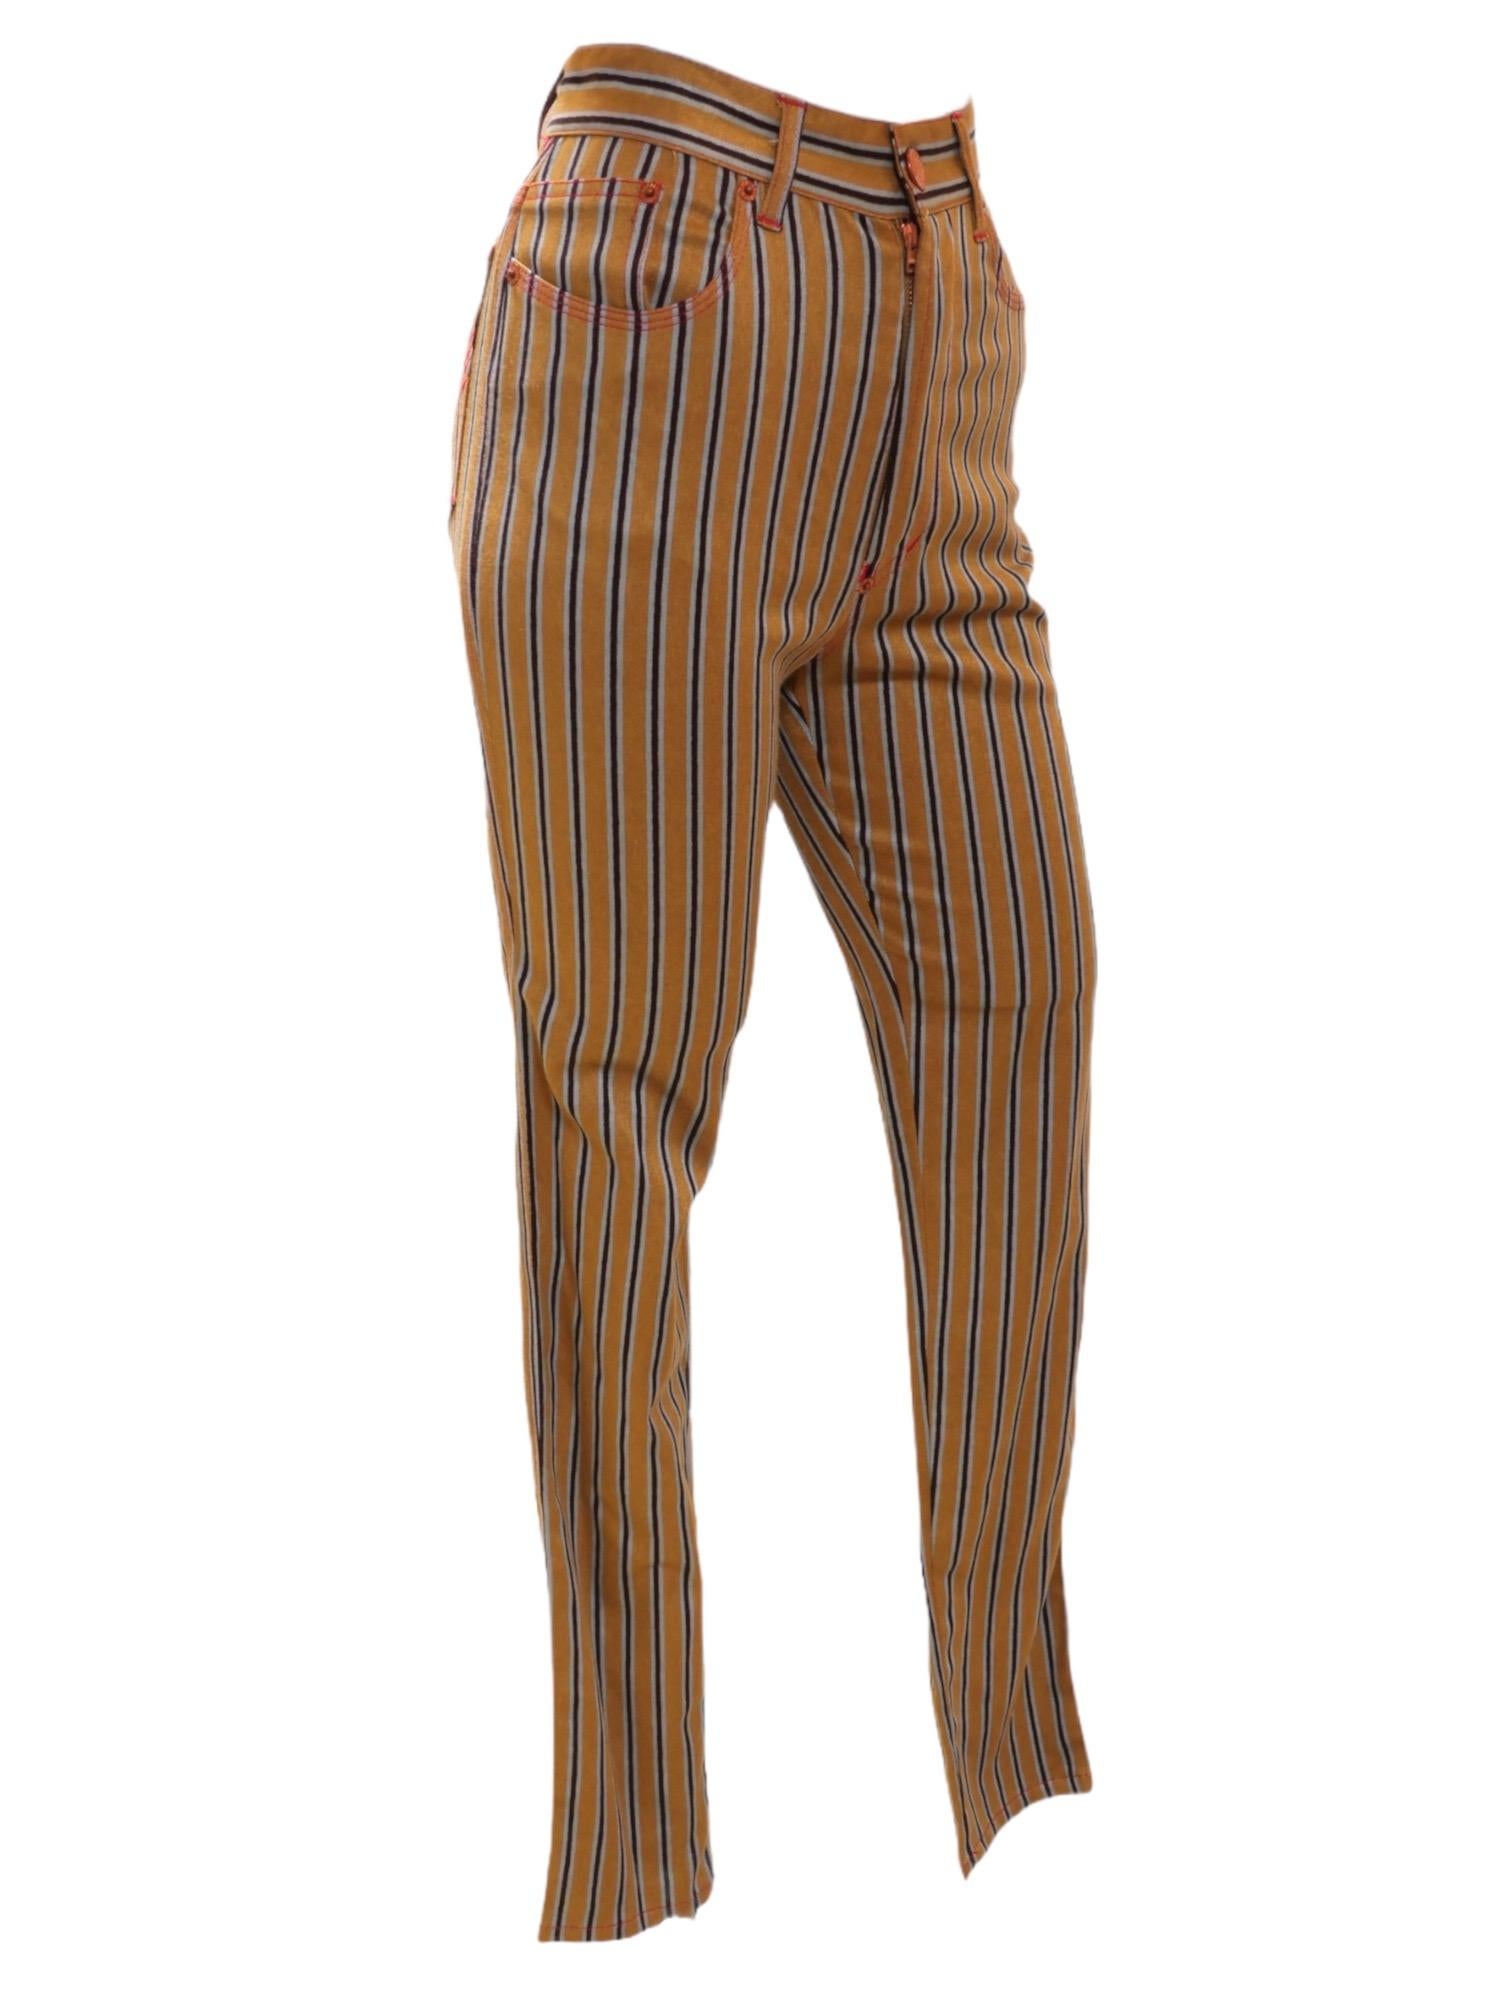 mens striped jeans